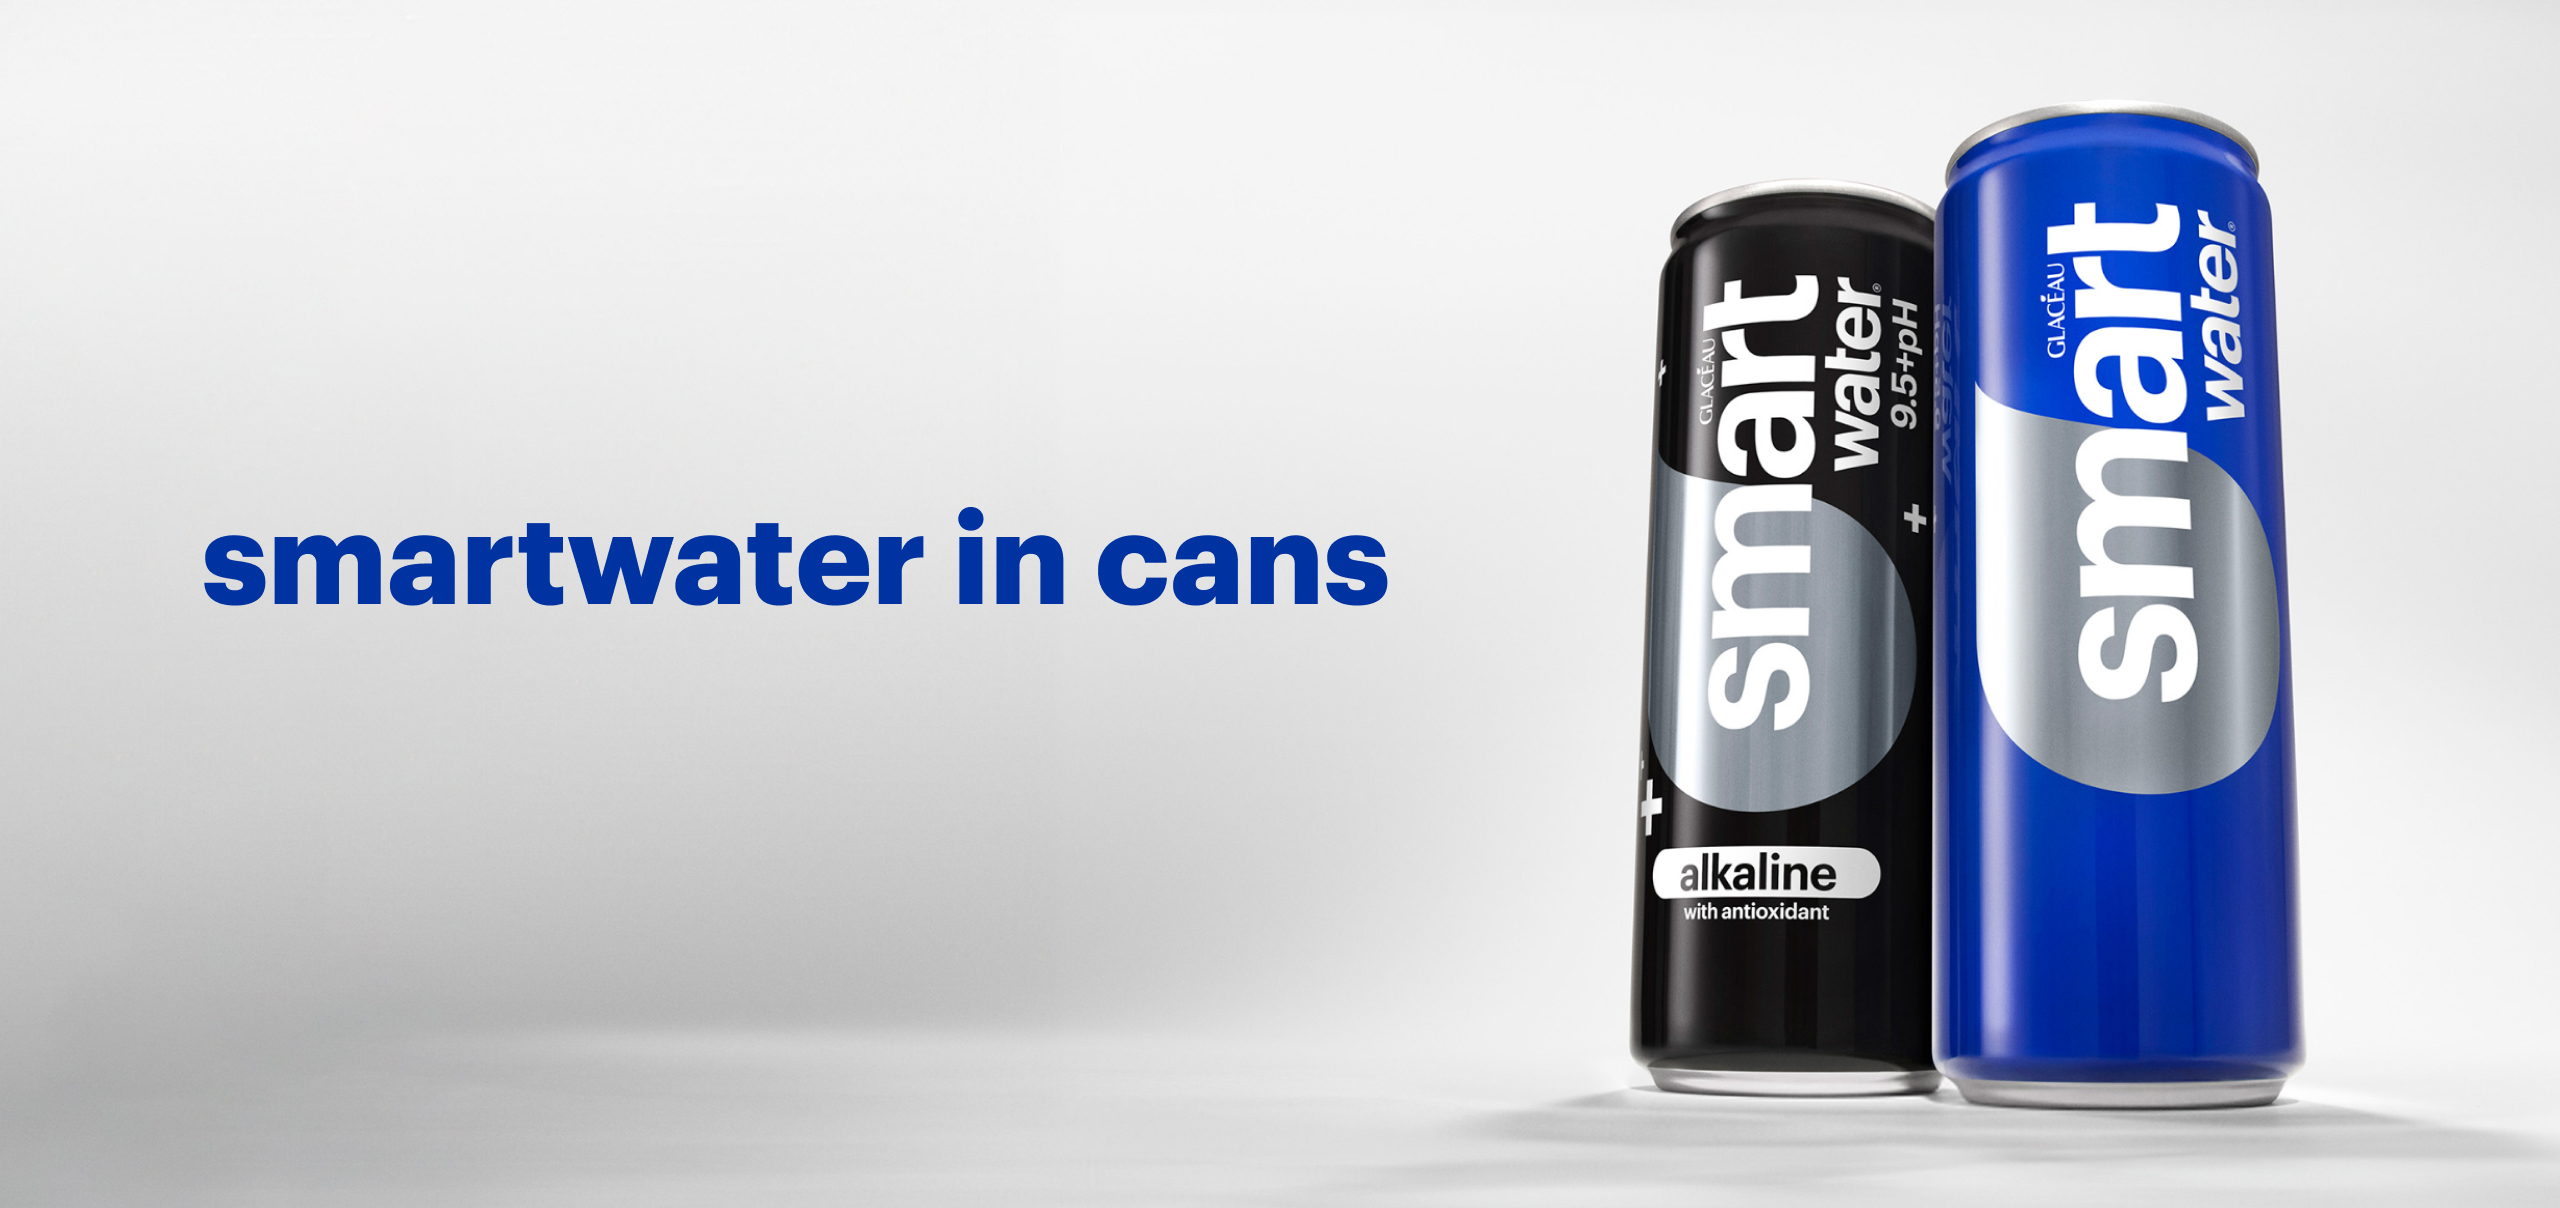 two smartwater cans